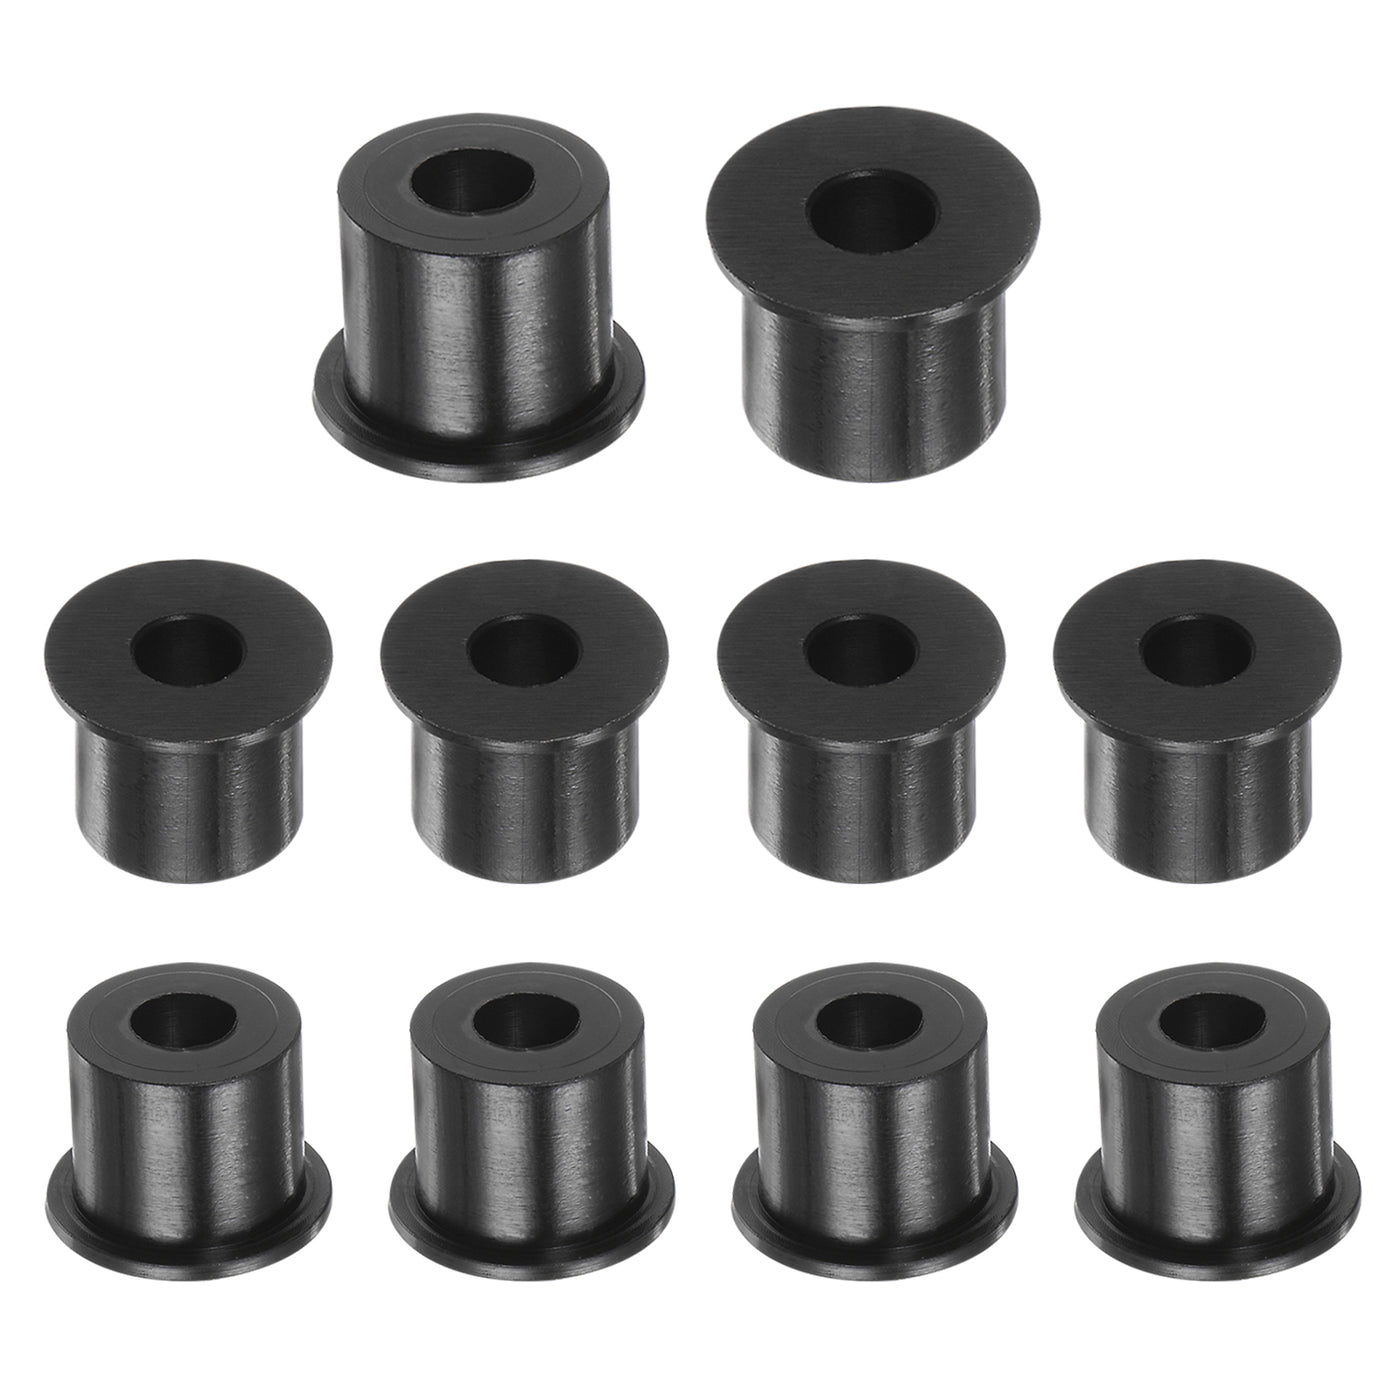 uxcell Uxcell 10pcs Flanged Sleeve Bearings 8.2mm ID 17.8mm OD 17mm Length Nylon Bushing White